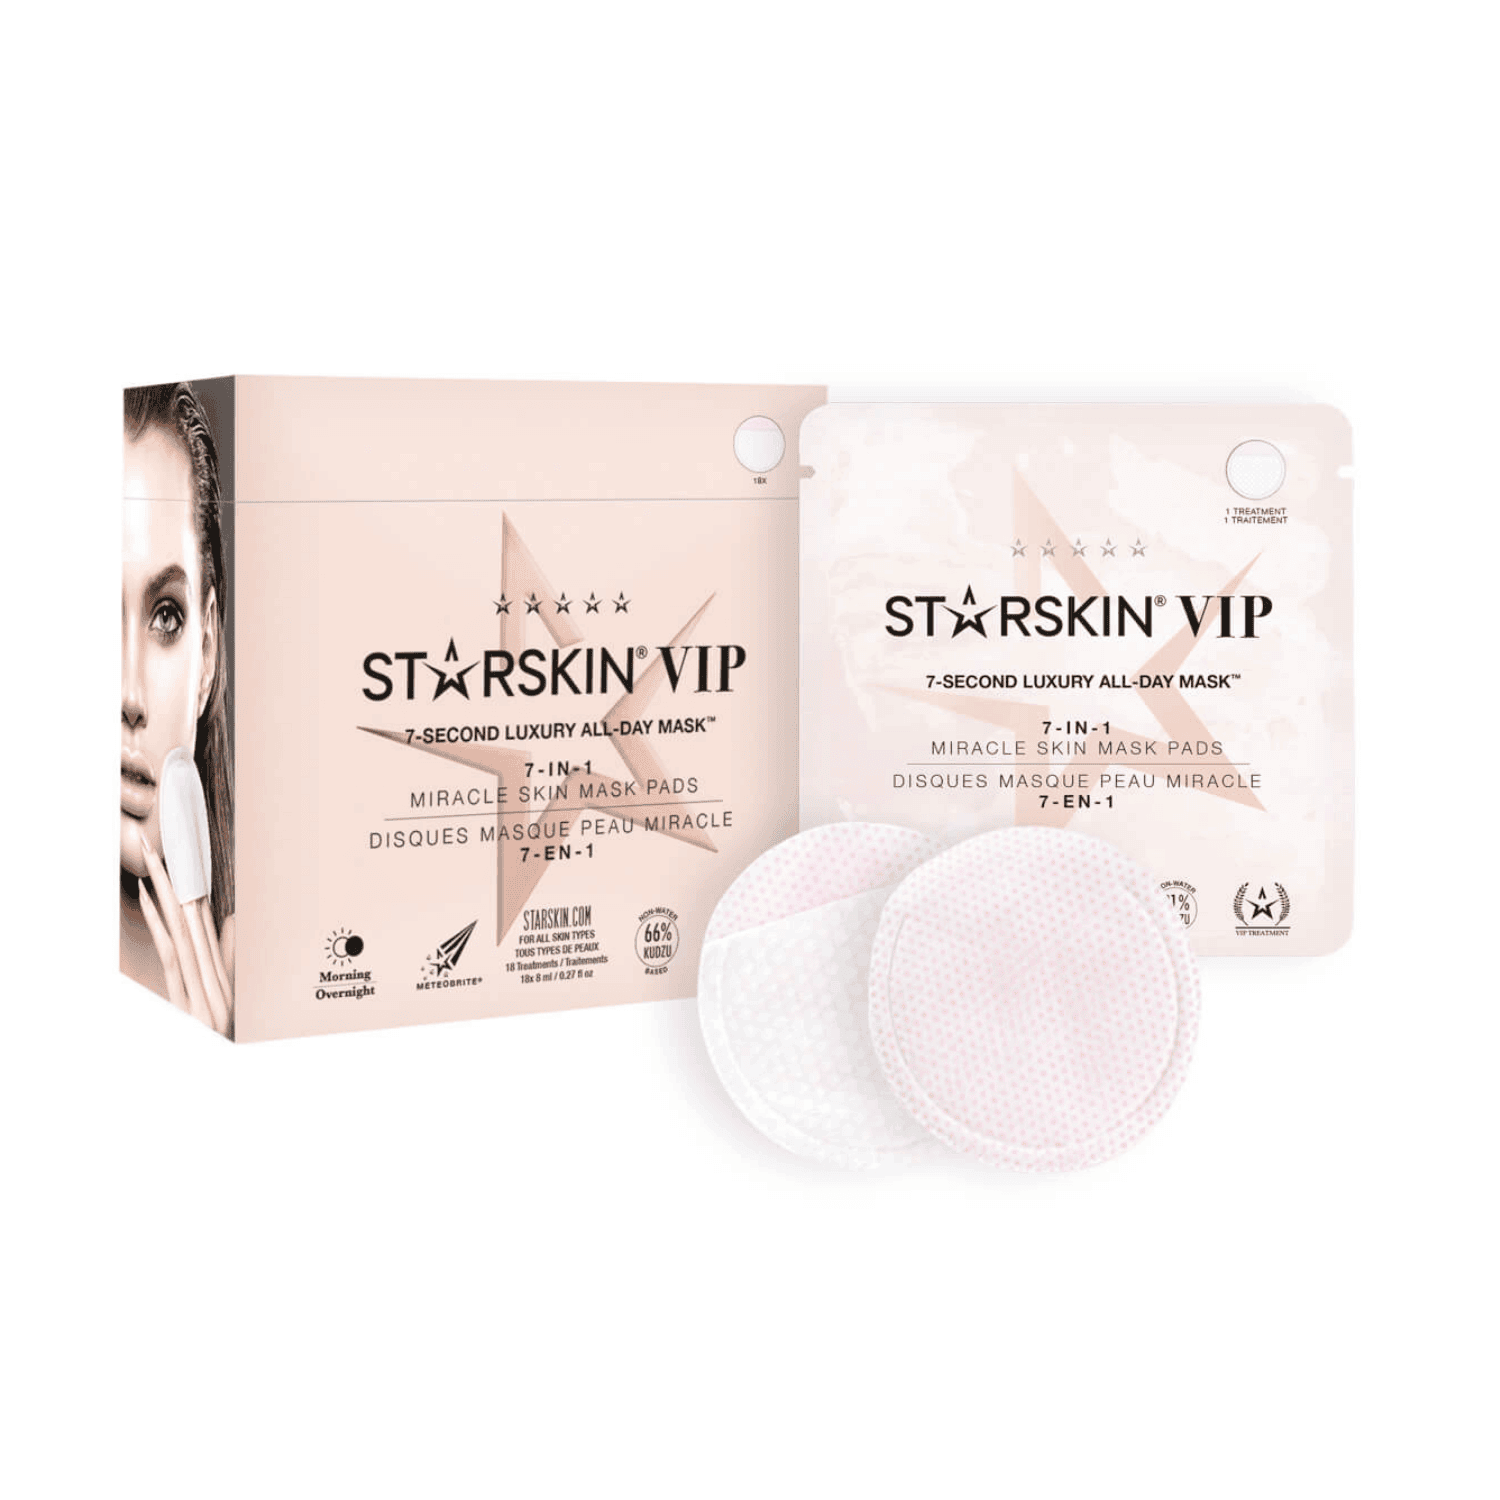 STARSKIN 7-Second Luxury All-Day Mask VIP 7-In-1 Miracle Skin Mask Pads - 18 Pack